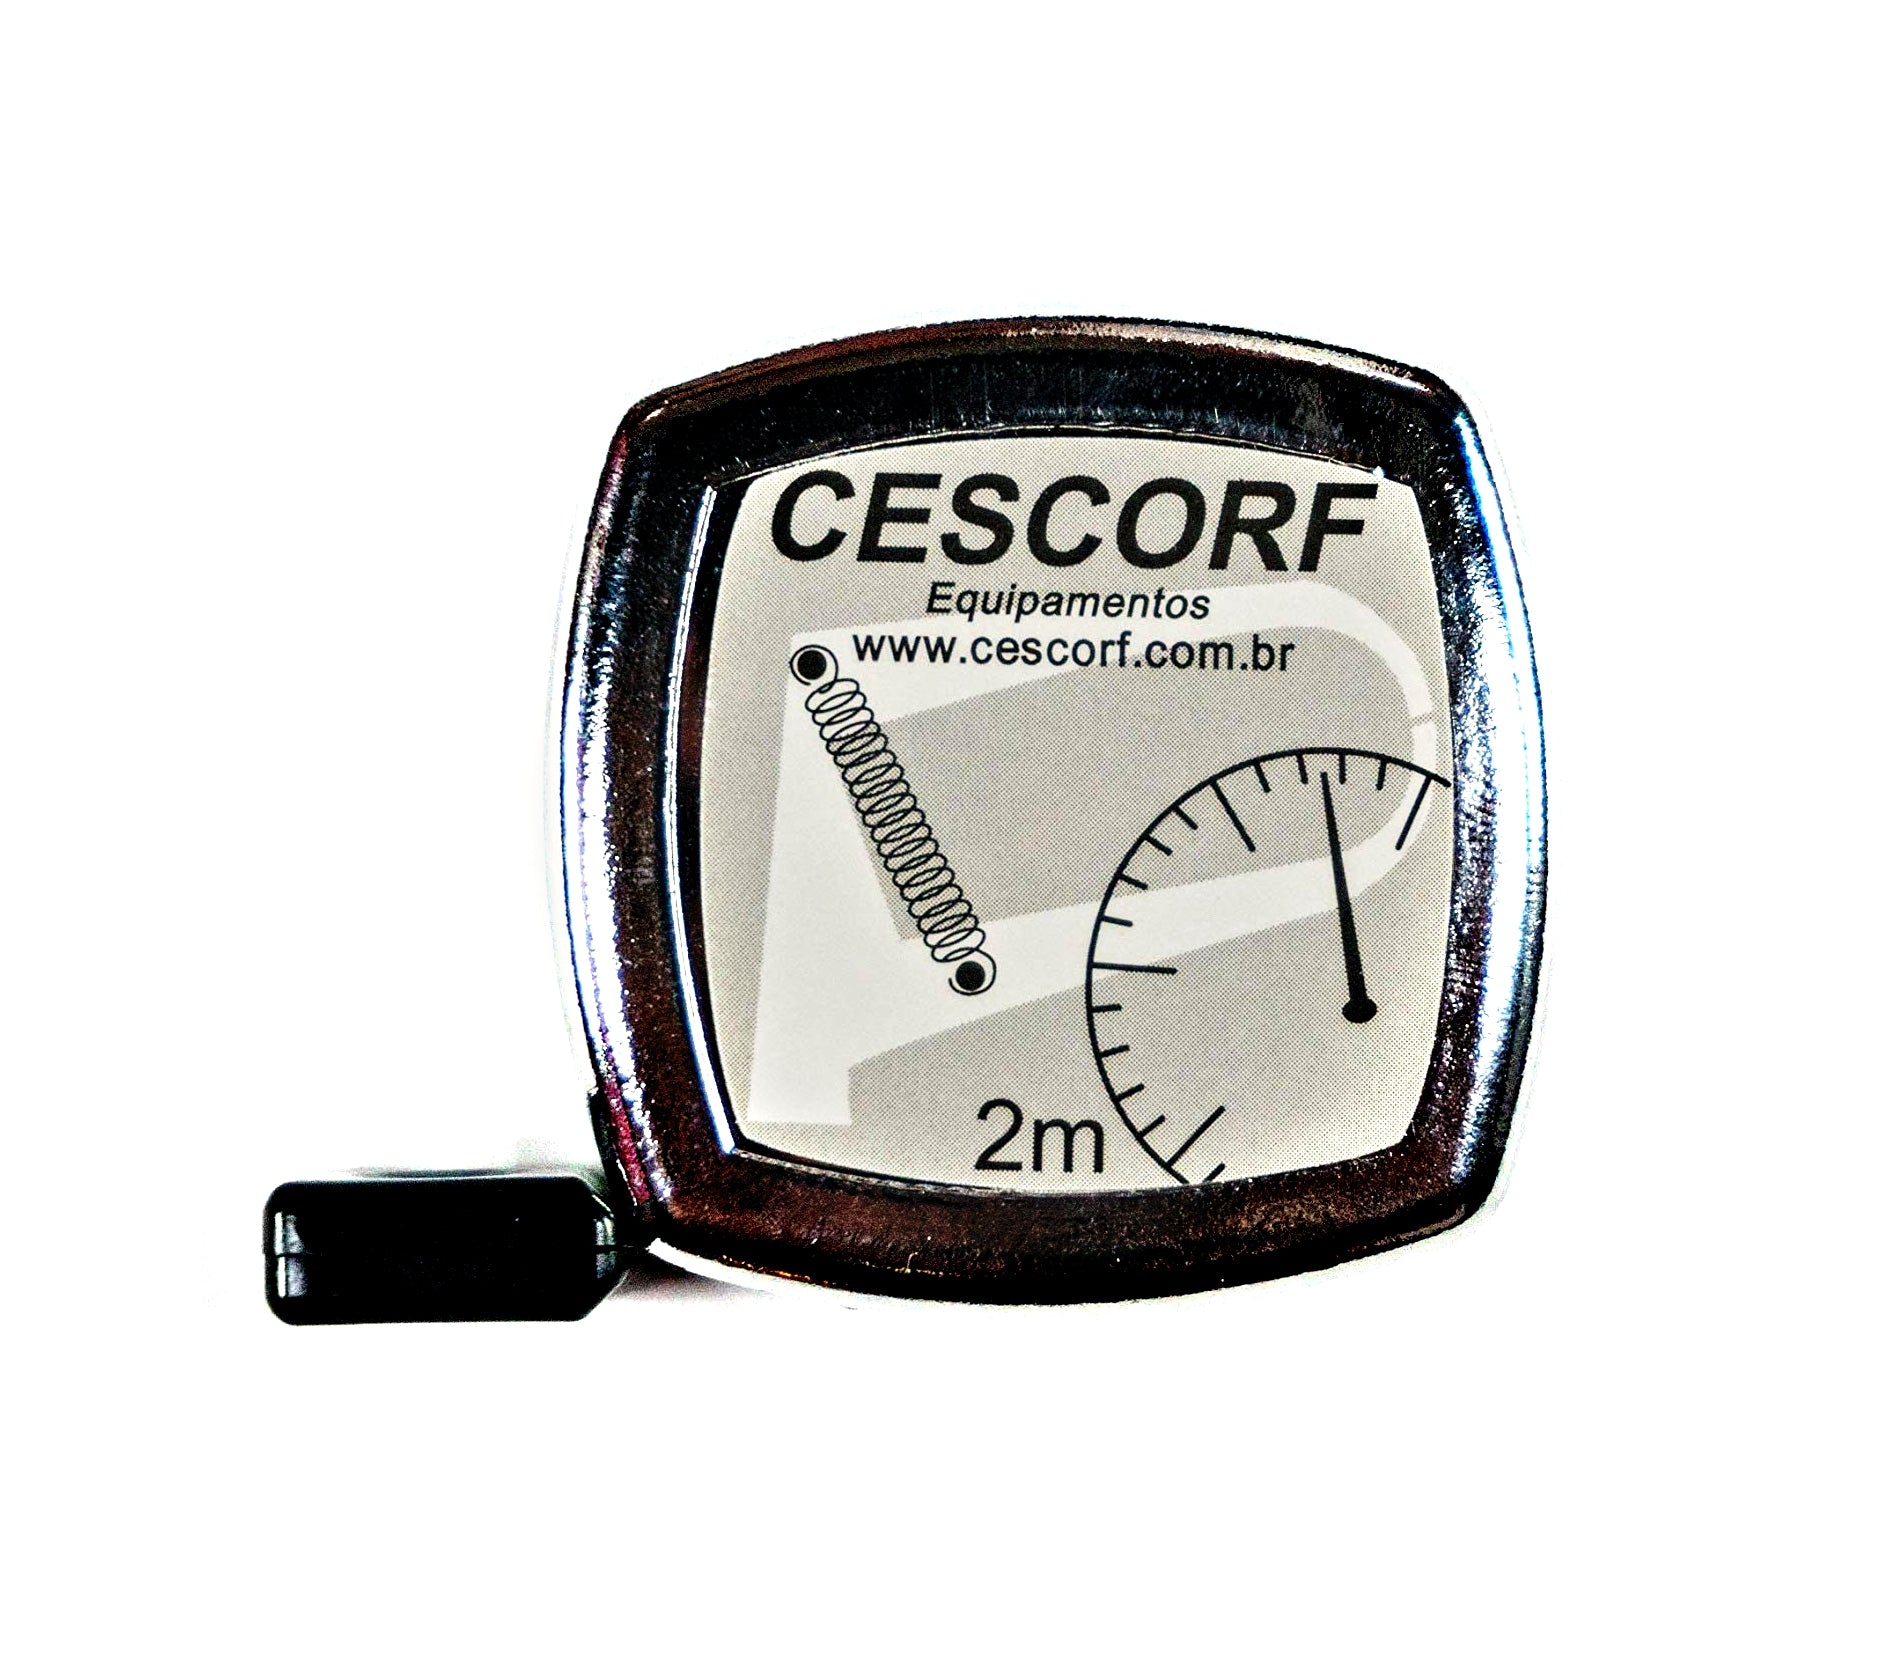 Cescorf Anthropometric Tape Measure with Flat Flexible Steel Blade for Body Circumference Measurements, 6mm x 2M, Metric, with Blank Space Before